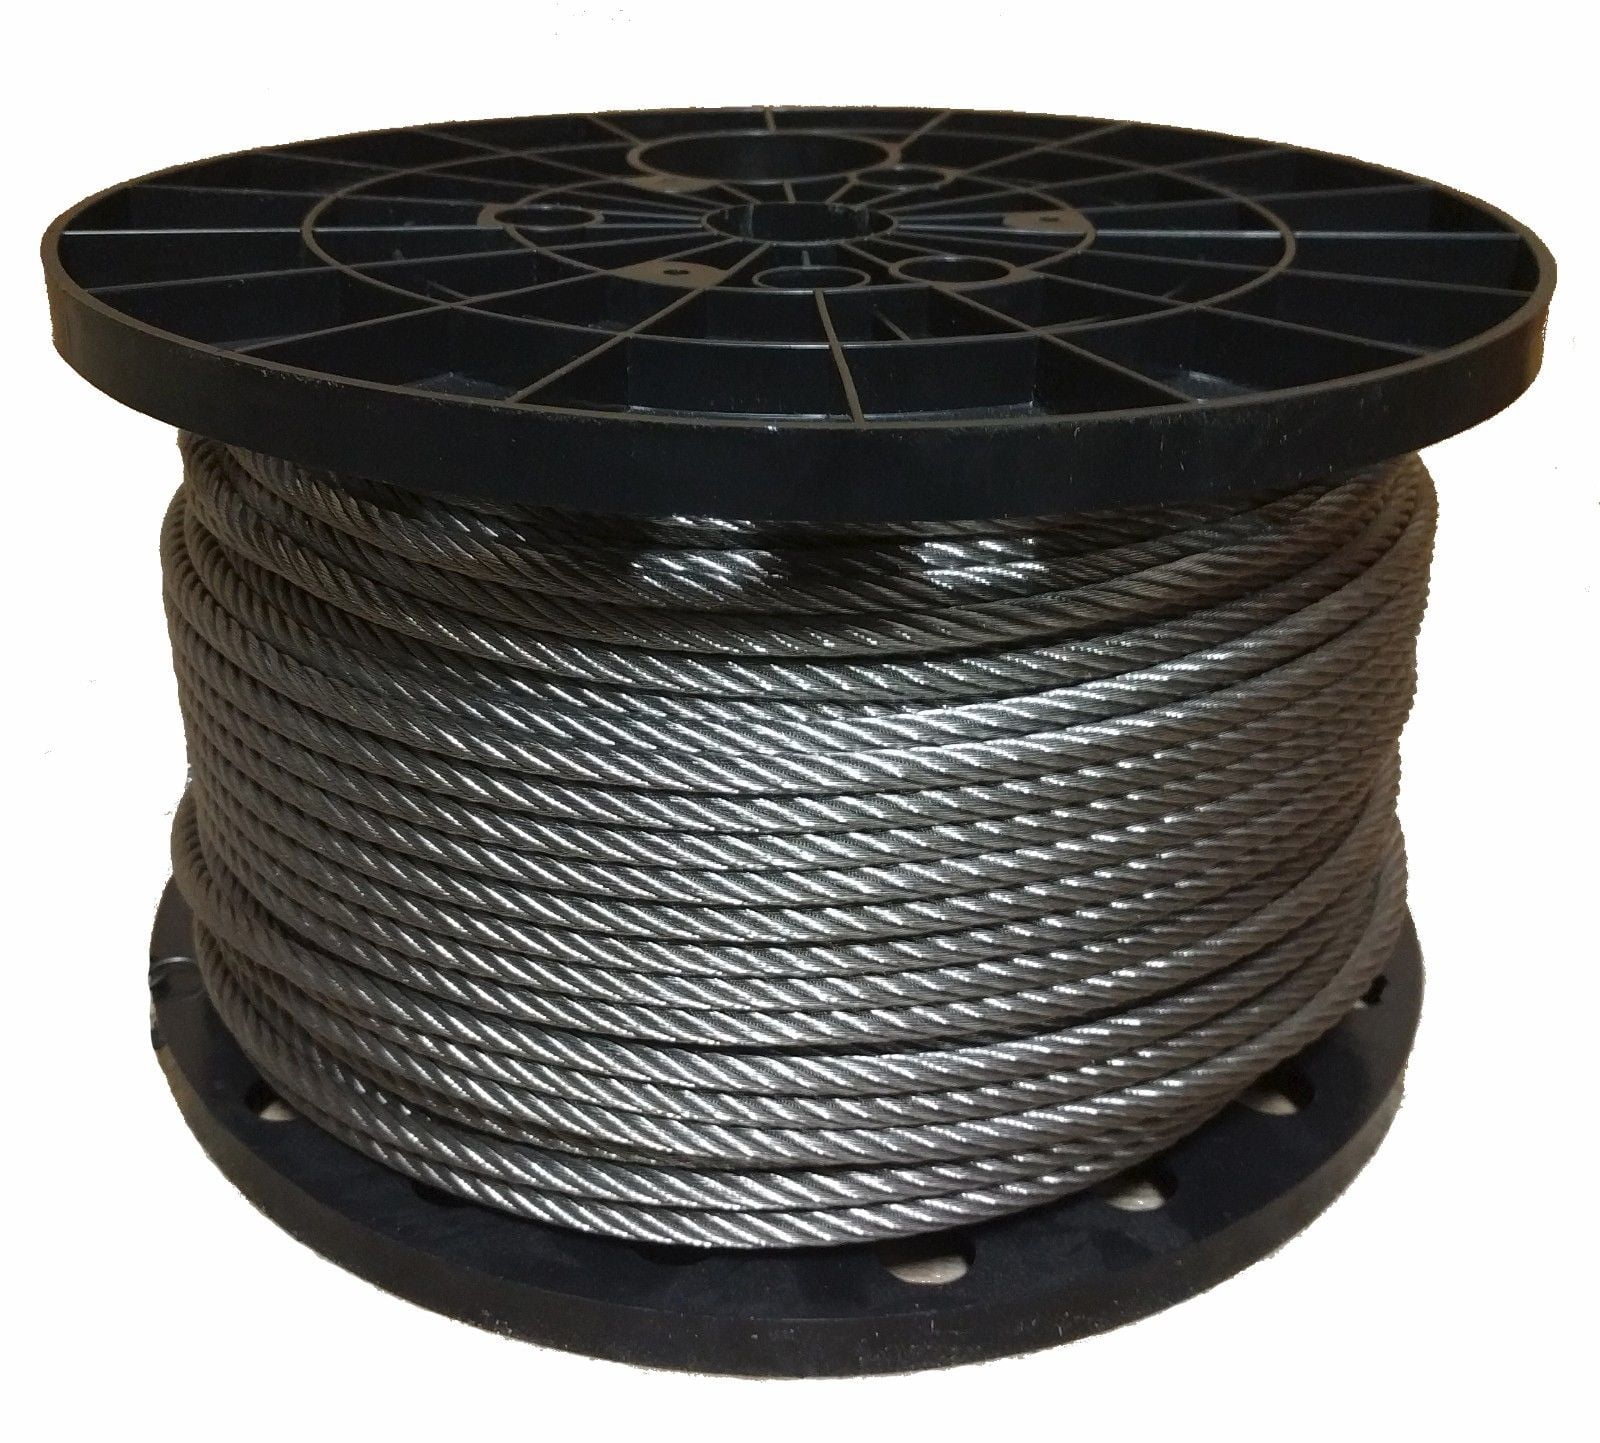 Two Loops 40 Ft Cable Length Black Vinyl Coated Galvanized Steel Wire Rope 7x19 Strand 3/16-1/4